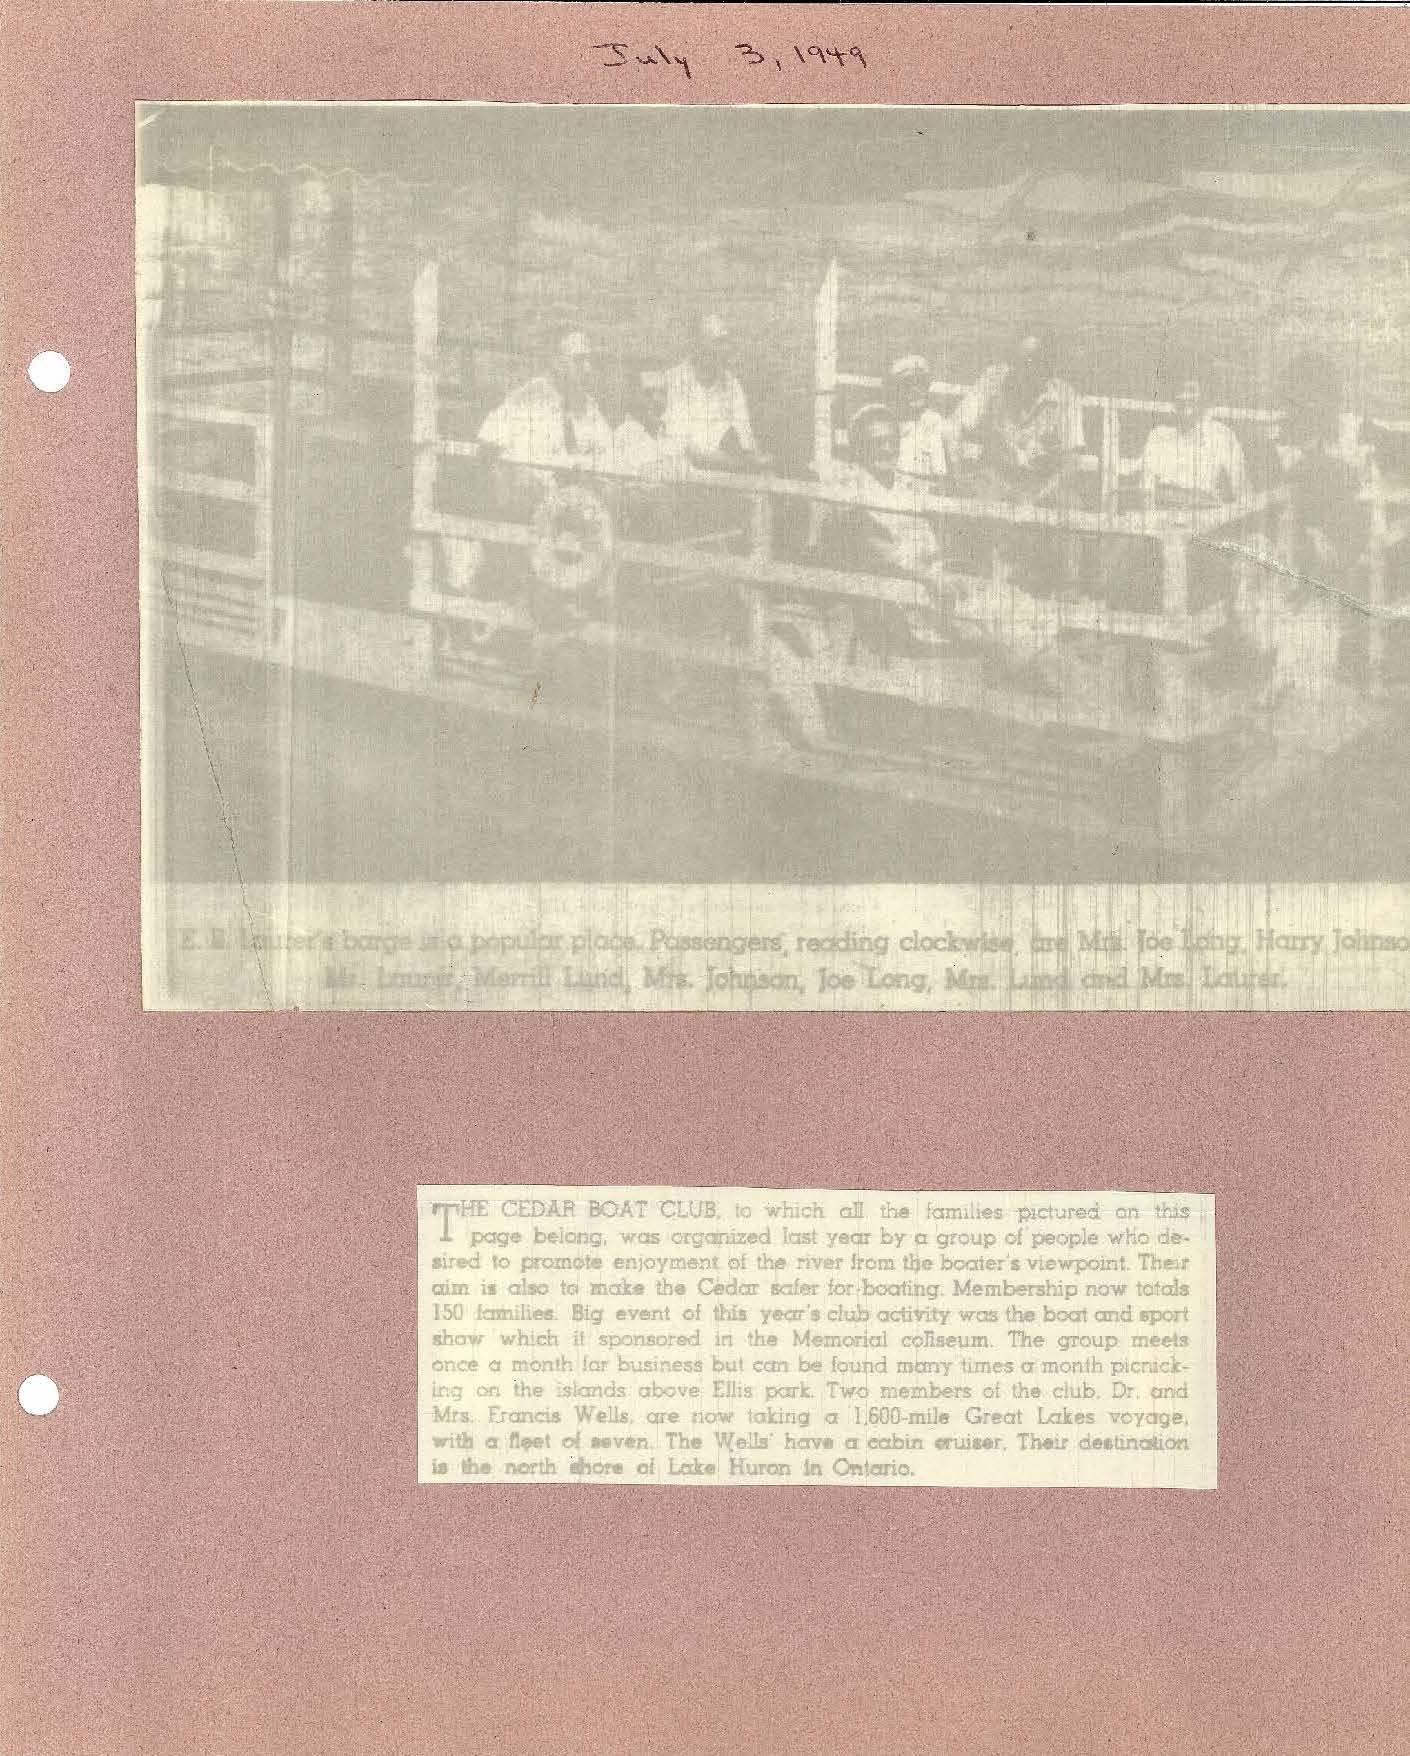 Newspaper photo and article July 3, 1949 showing people in boat and announcing 1,600 mile great lakes boat voyage